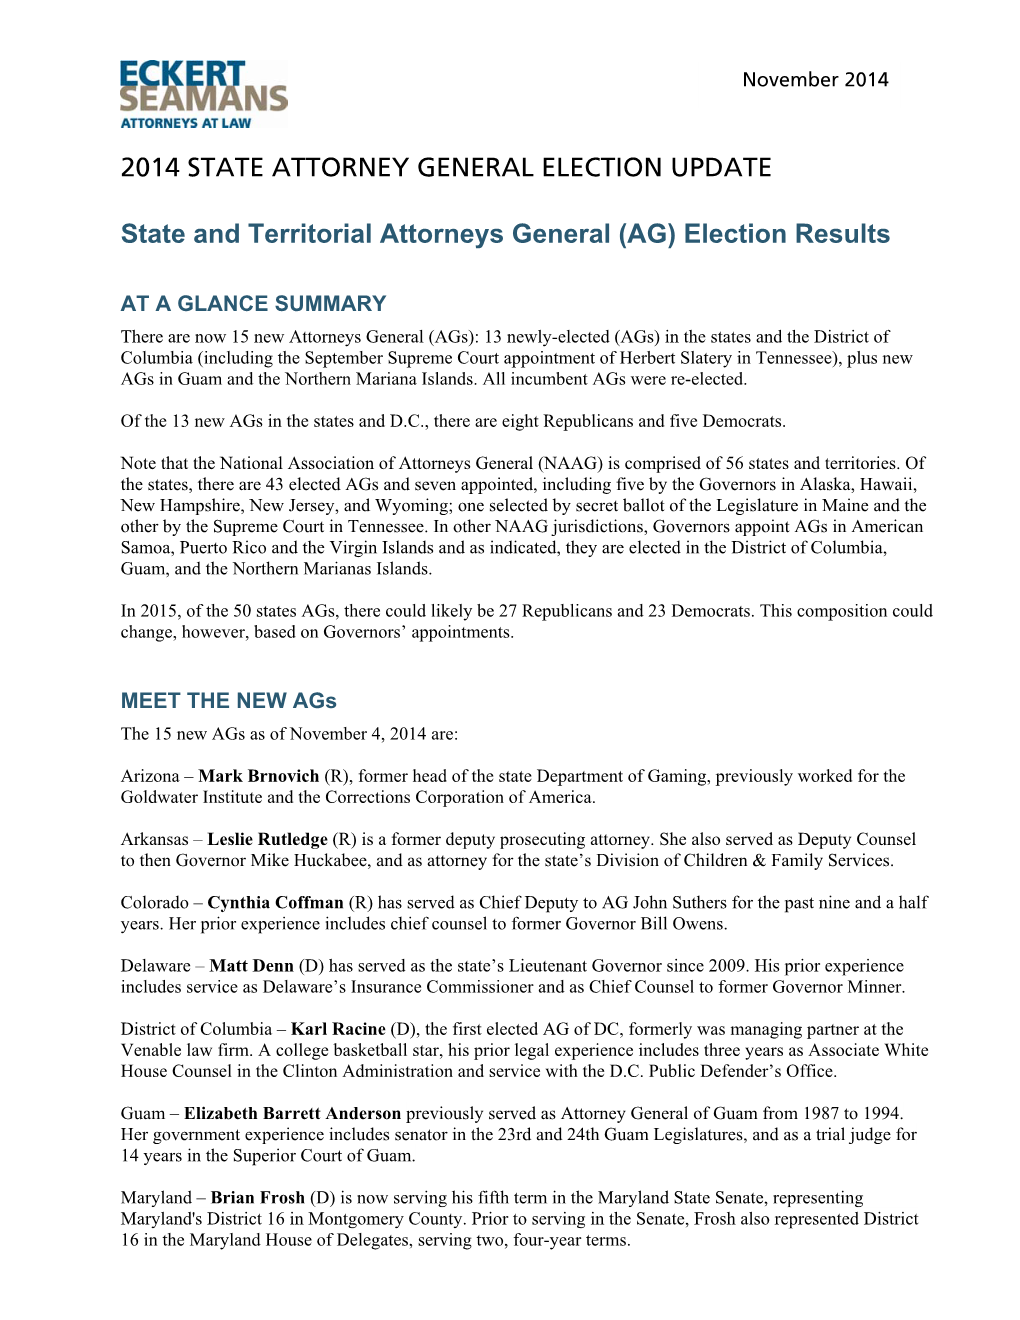 State Attorney General Election Update 2014